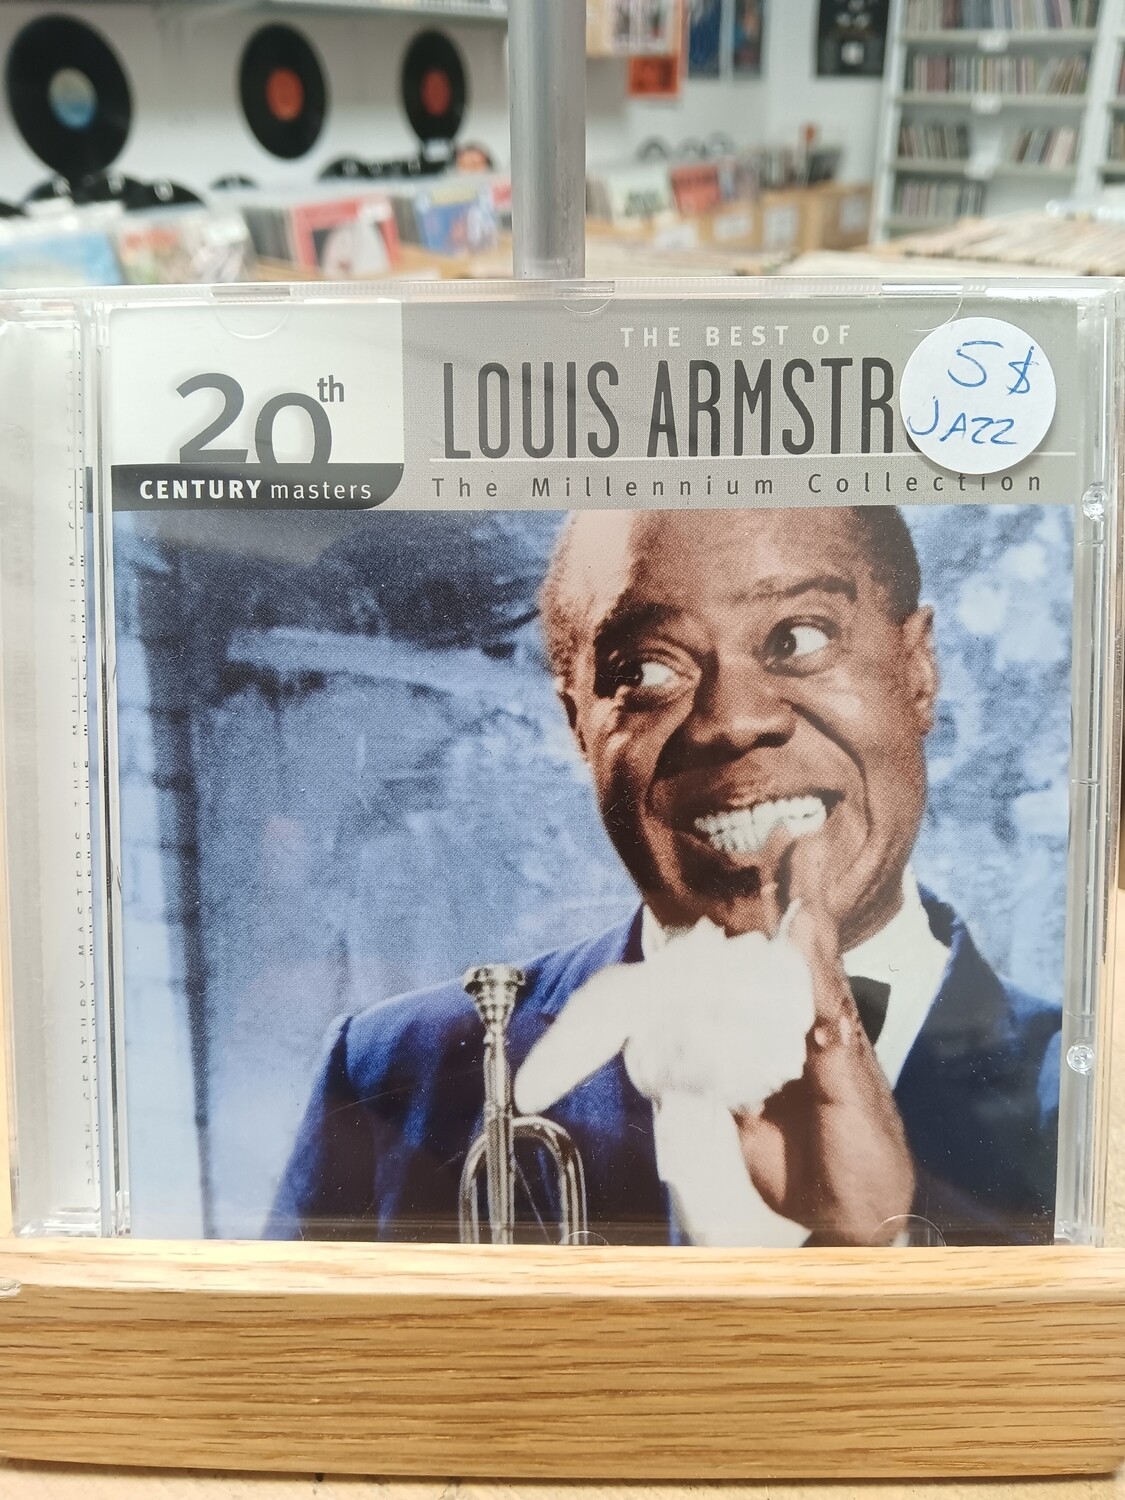 LOUIS ARMSTRONG - The Best of Louis Armstrong (CD)